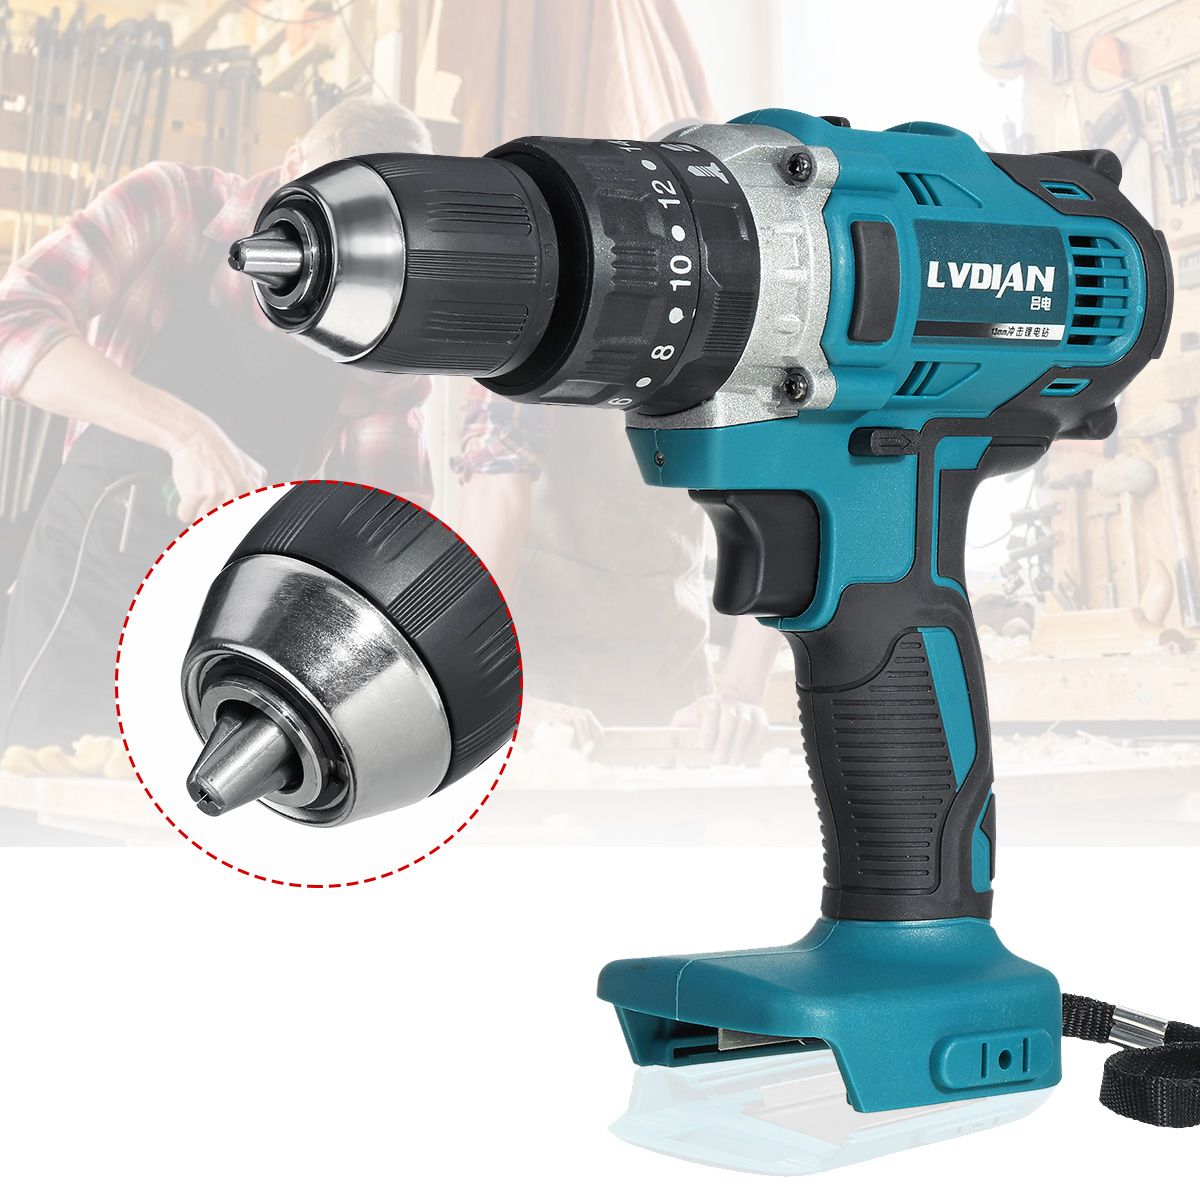 18V-3-In-1-Cordless-Impact-Drill-2-Speed-Rechargable-Electric-Screwdriver-Drill-Li-Ion-Battery-Adapt-1602641